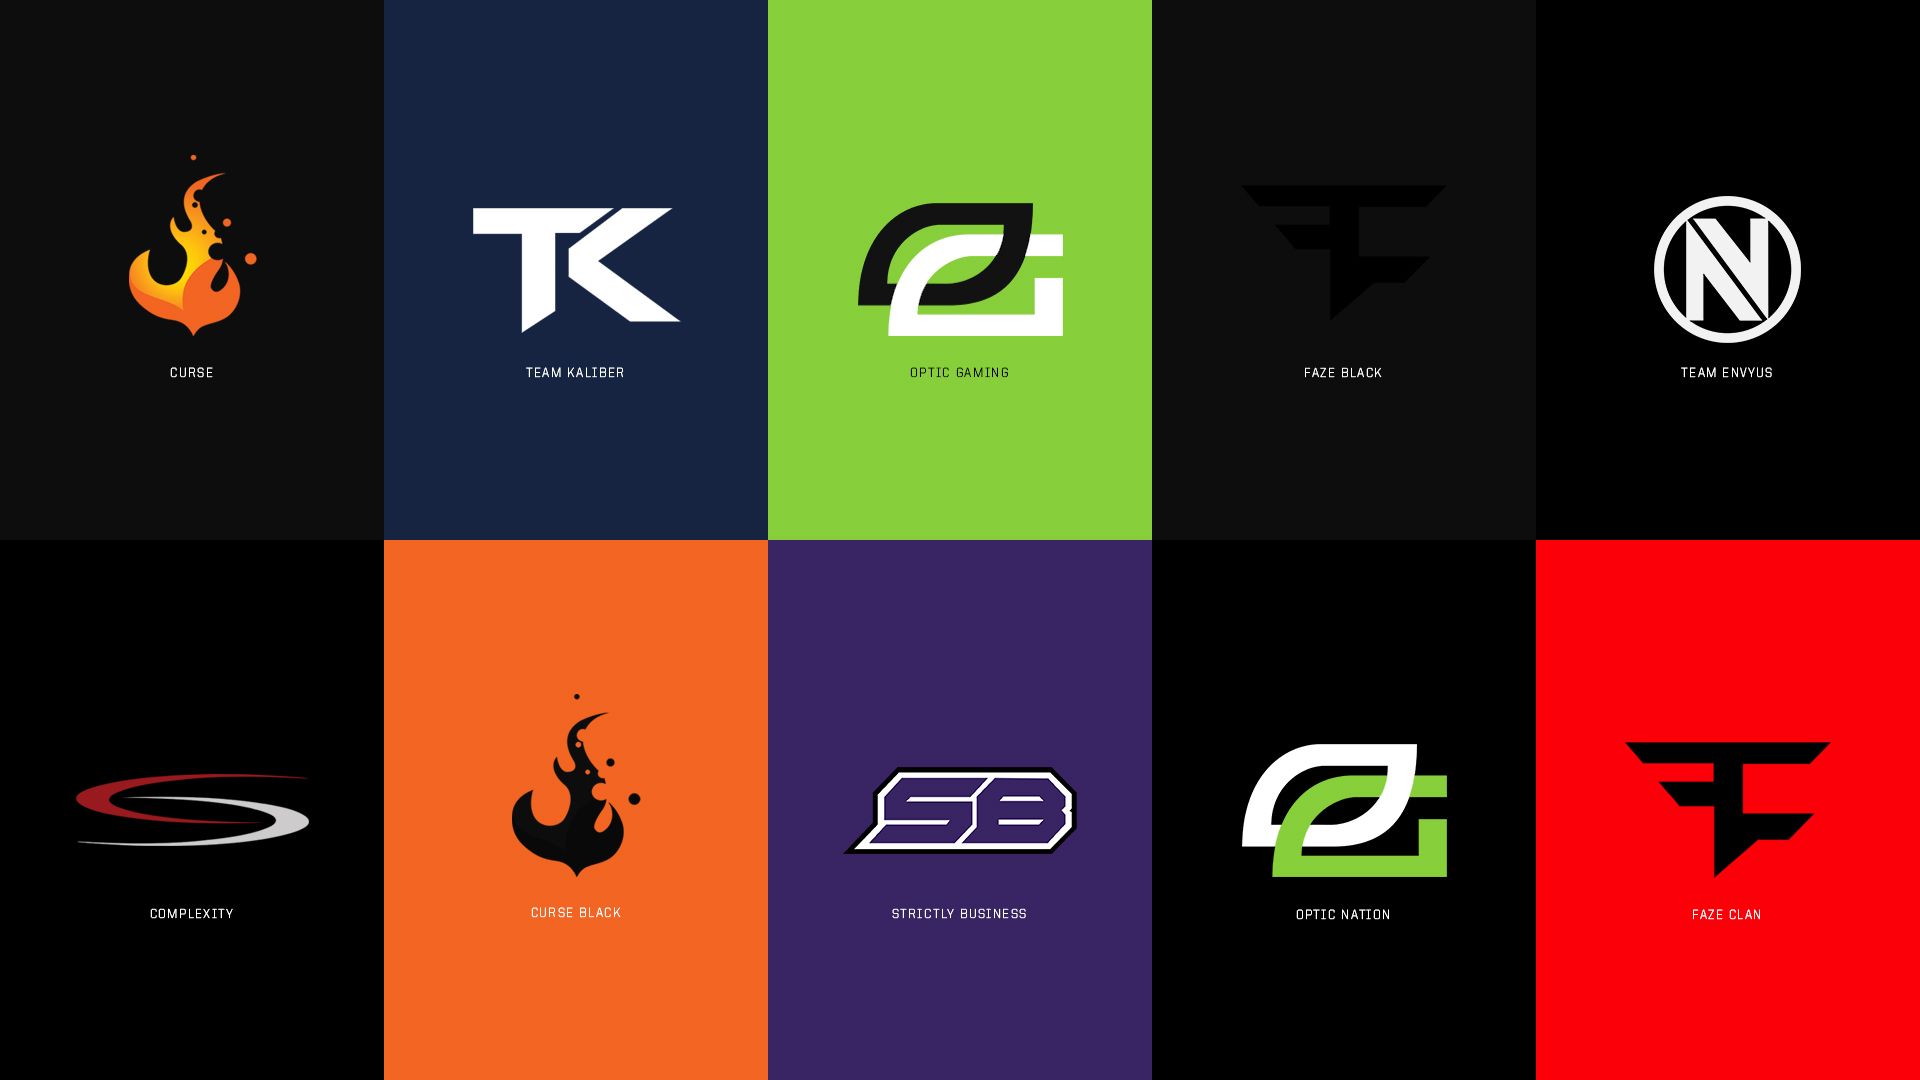 Made a wallpaper featuring all the OG orgs and teams pre CDL. Let me know what you think